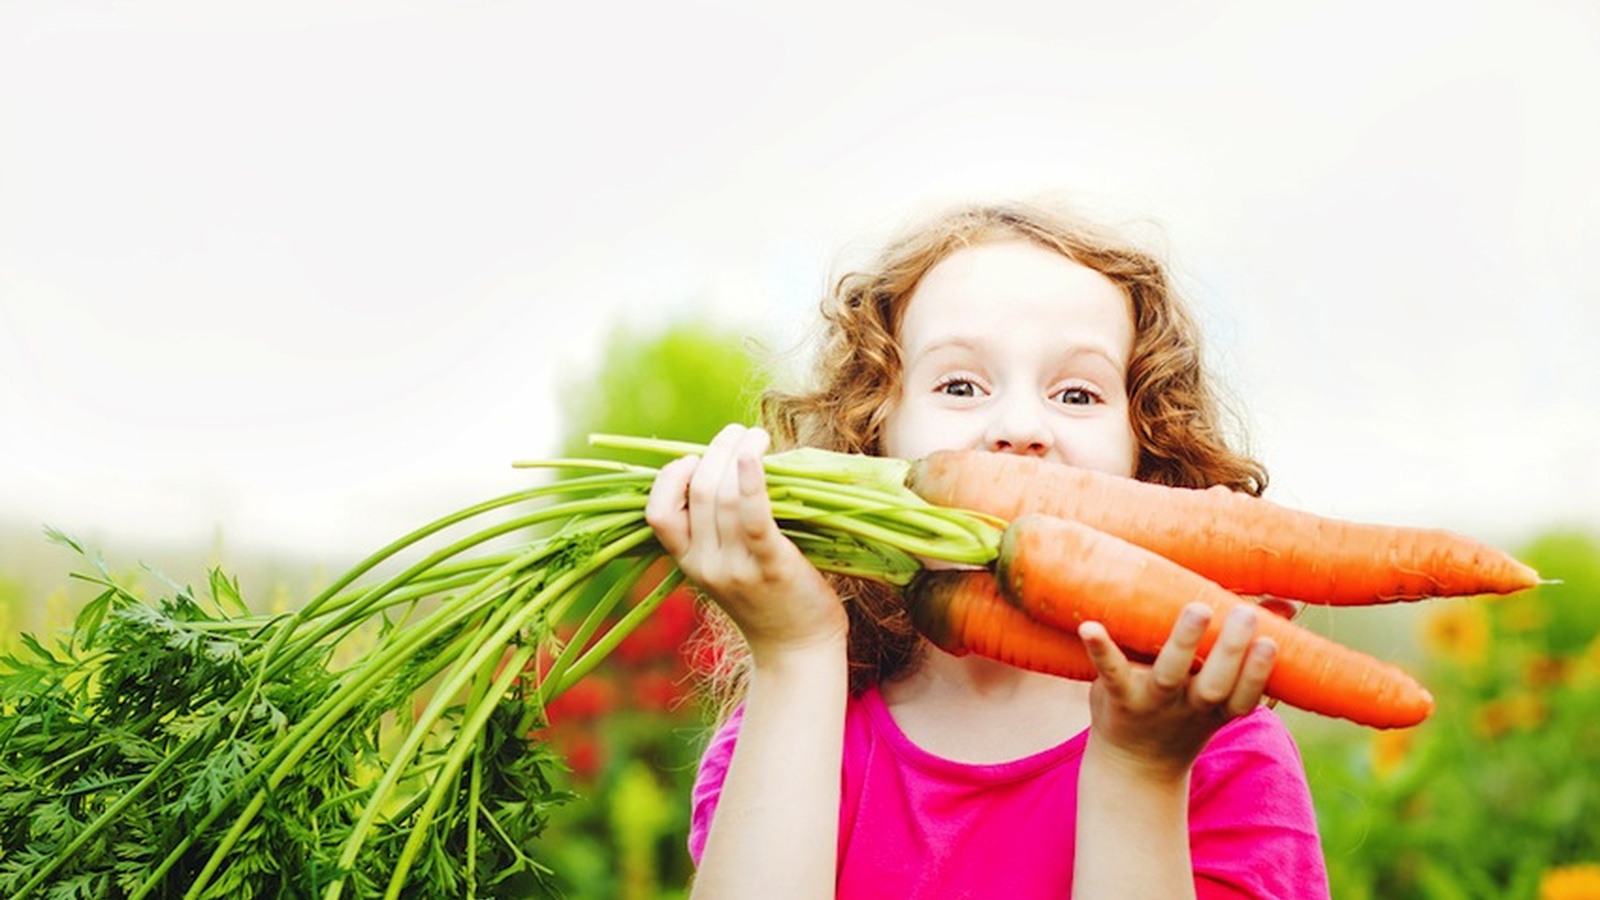 6 Ways to Sneak Superfoods Into Your Child's Meal